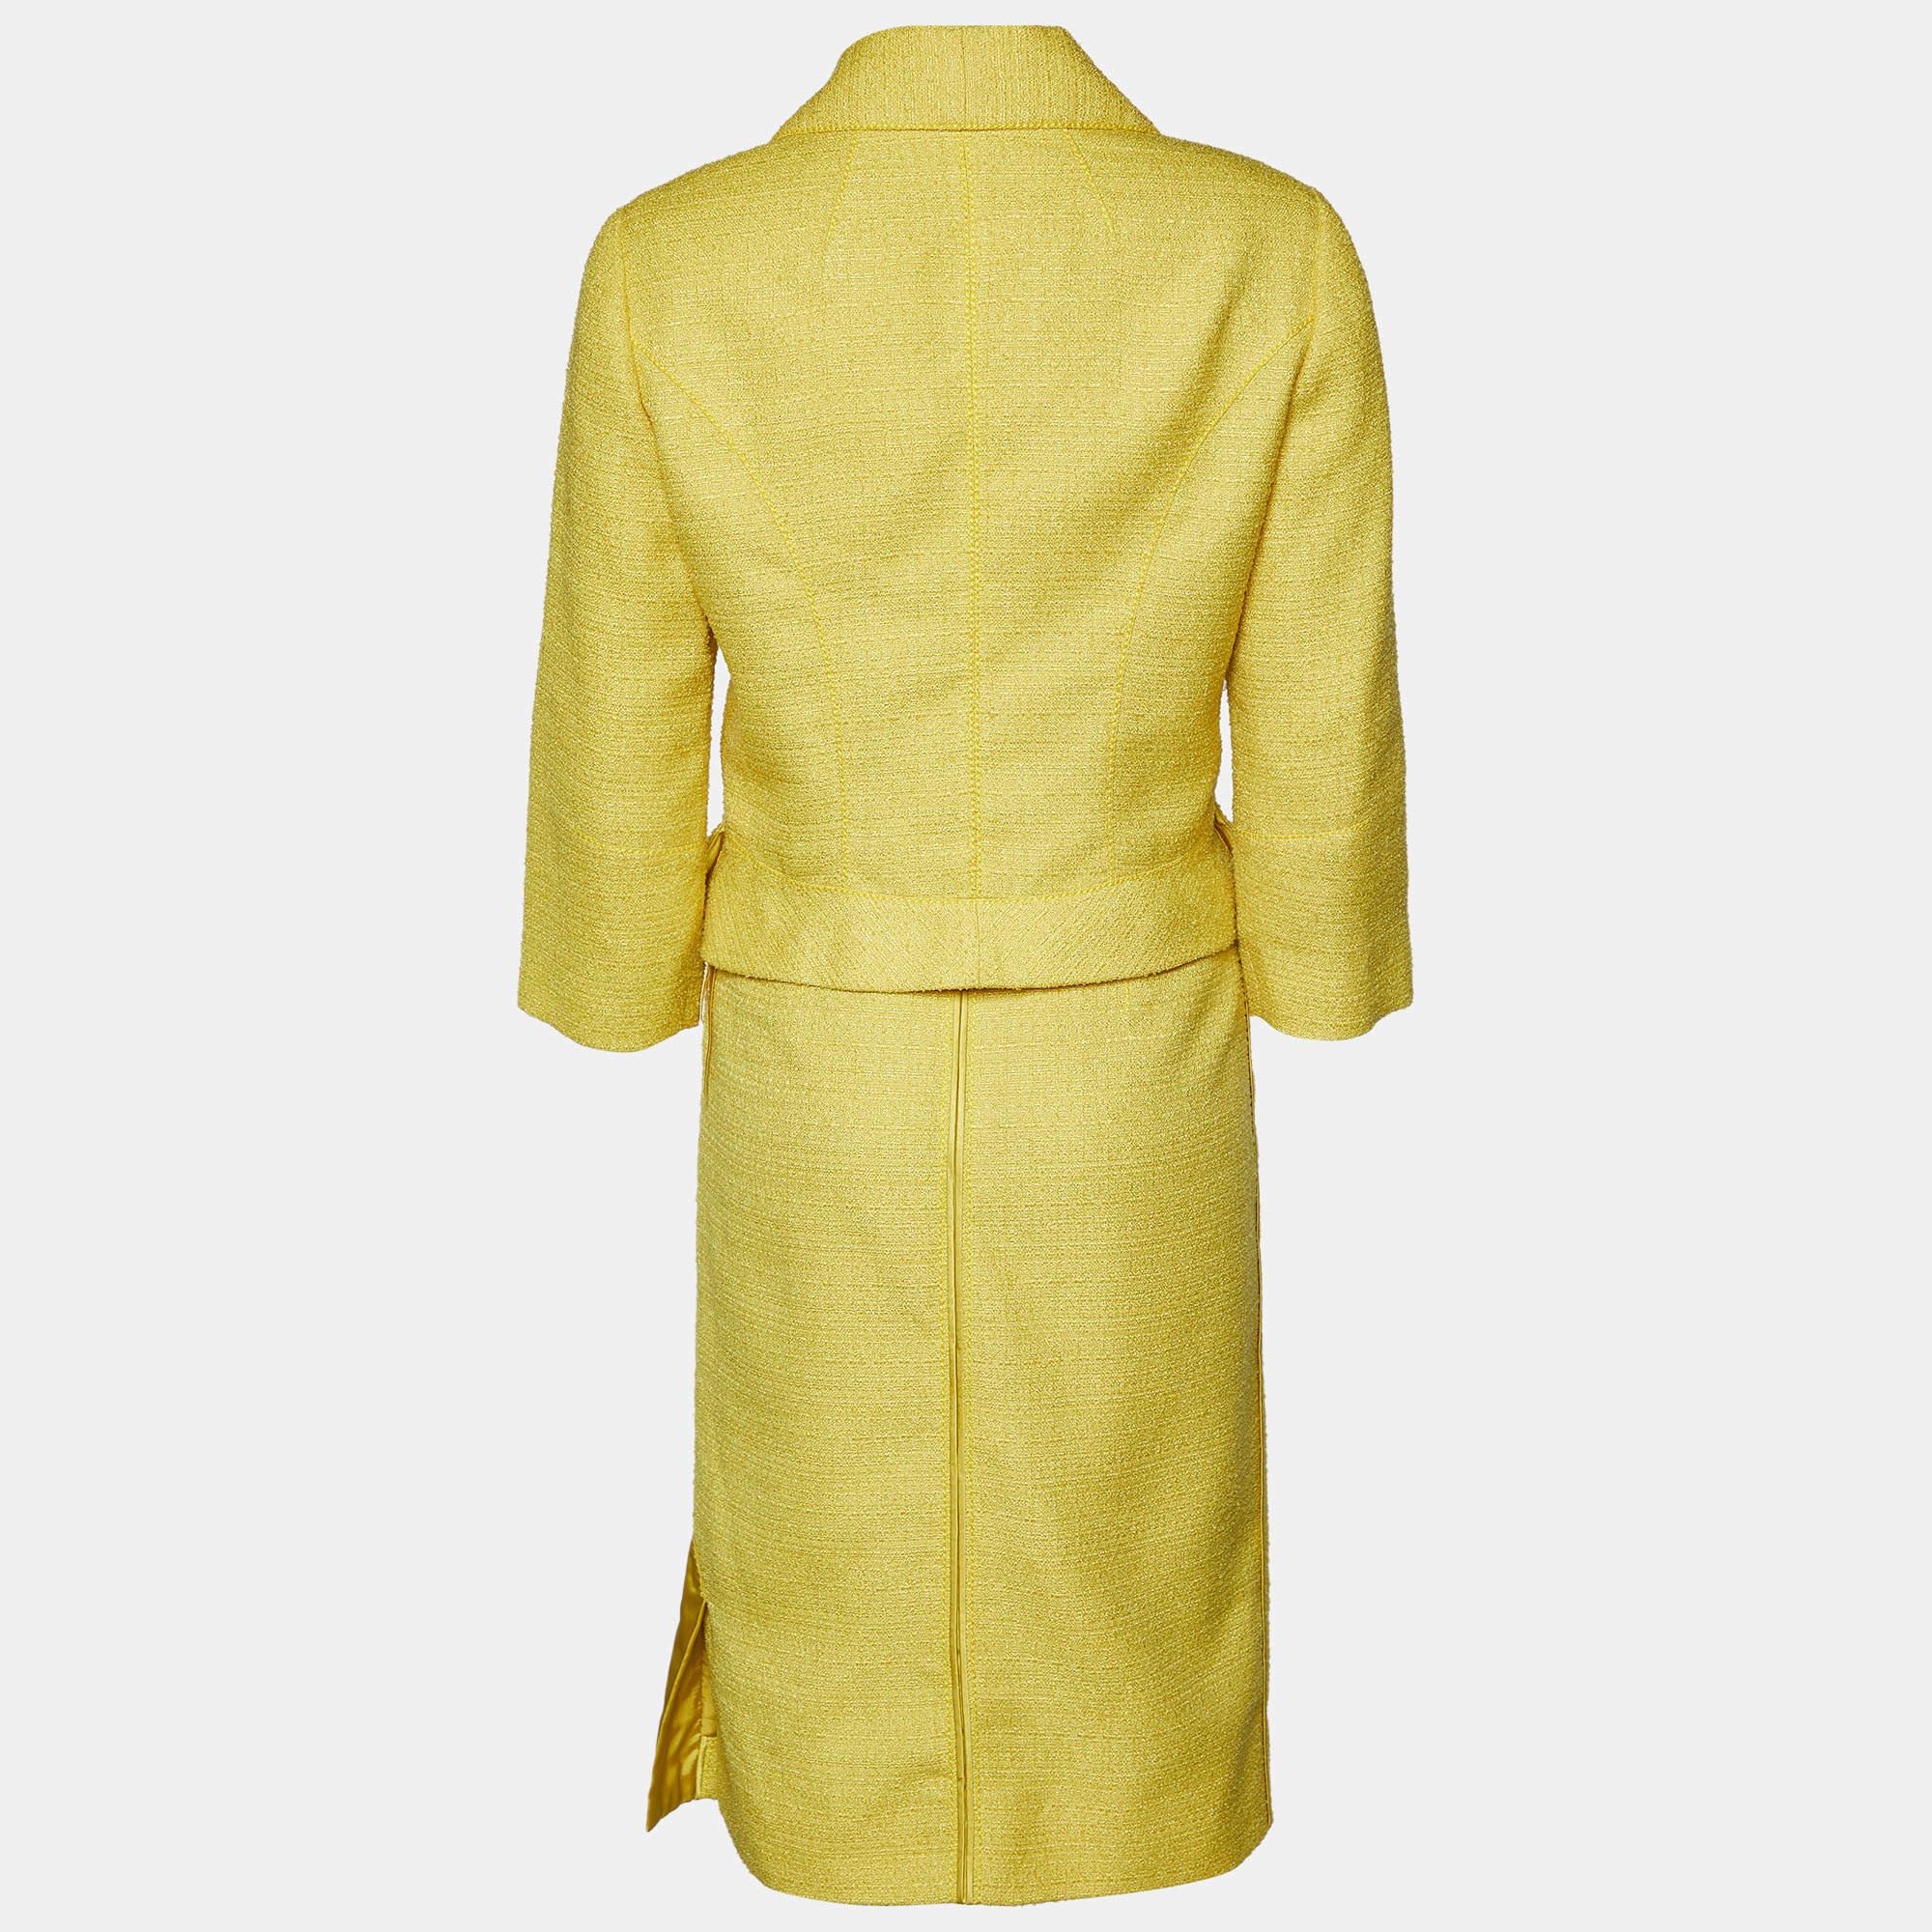 Louis Vuitton's blazer & skirt set comes in yellow tweed. The blazer has floral buttons, long sleeves, and front pockets. Team the set with smart pumps and a classy bag.

Includes: Blazer & Skirt